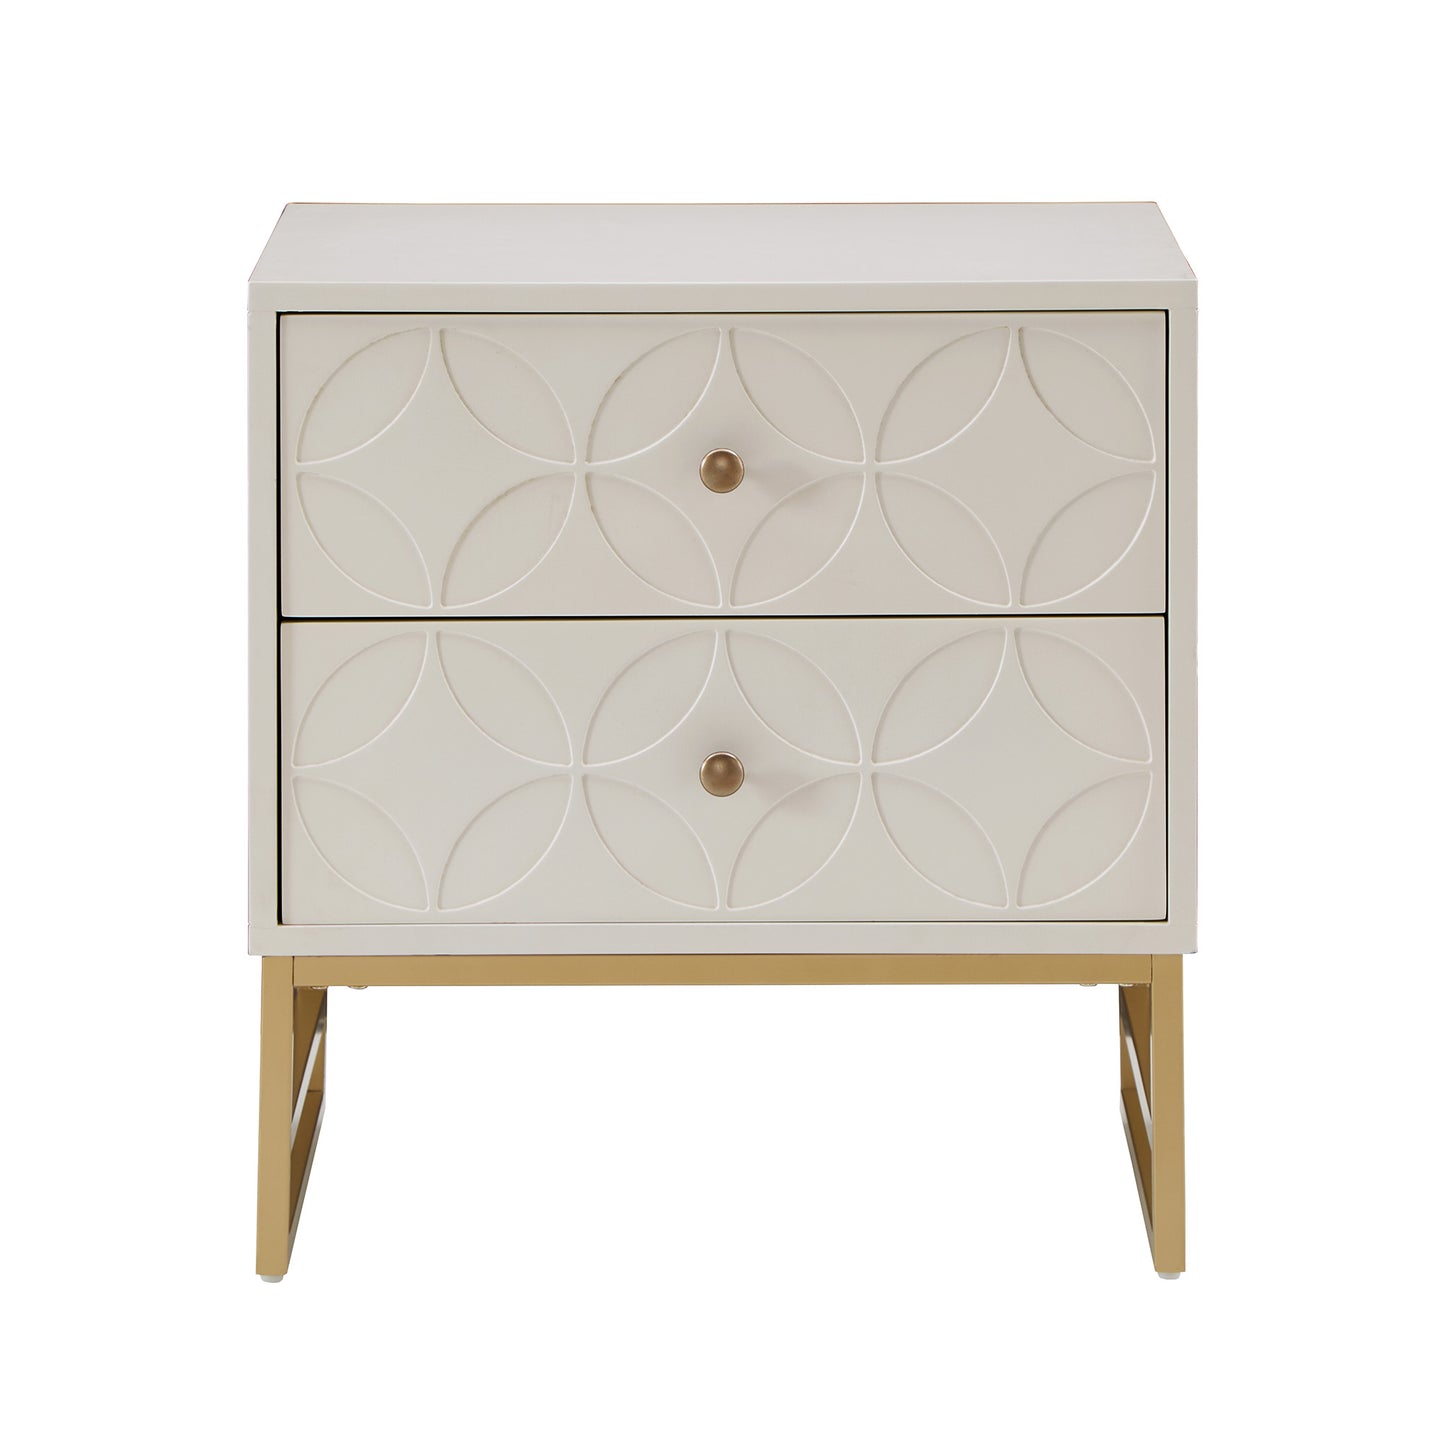 Arched Diamond Gold Metal End Table - White